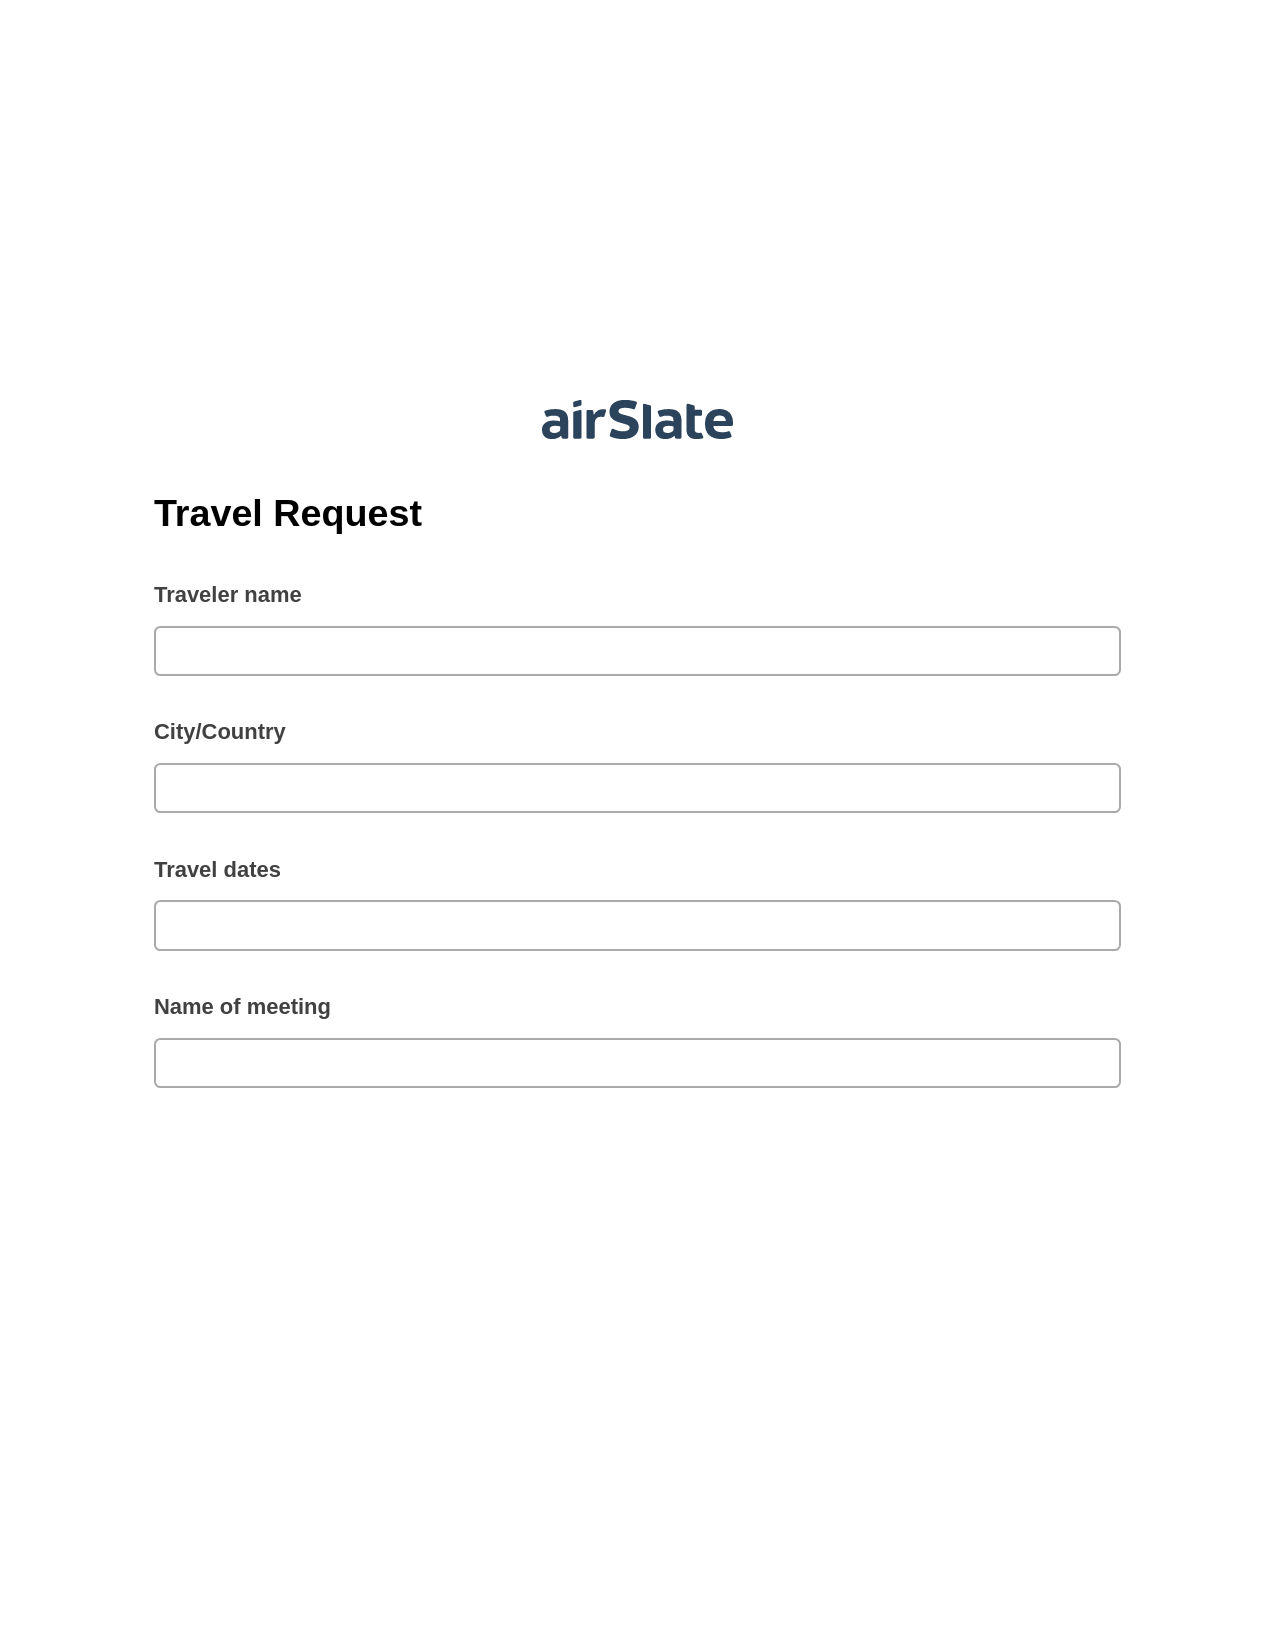 Travel Request Pre-fill Slate from MS Dynamics 365 Records Bot, Export to MS Dynamics 365 Bot, Export to Formstack Documents Bot